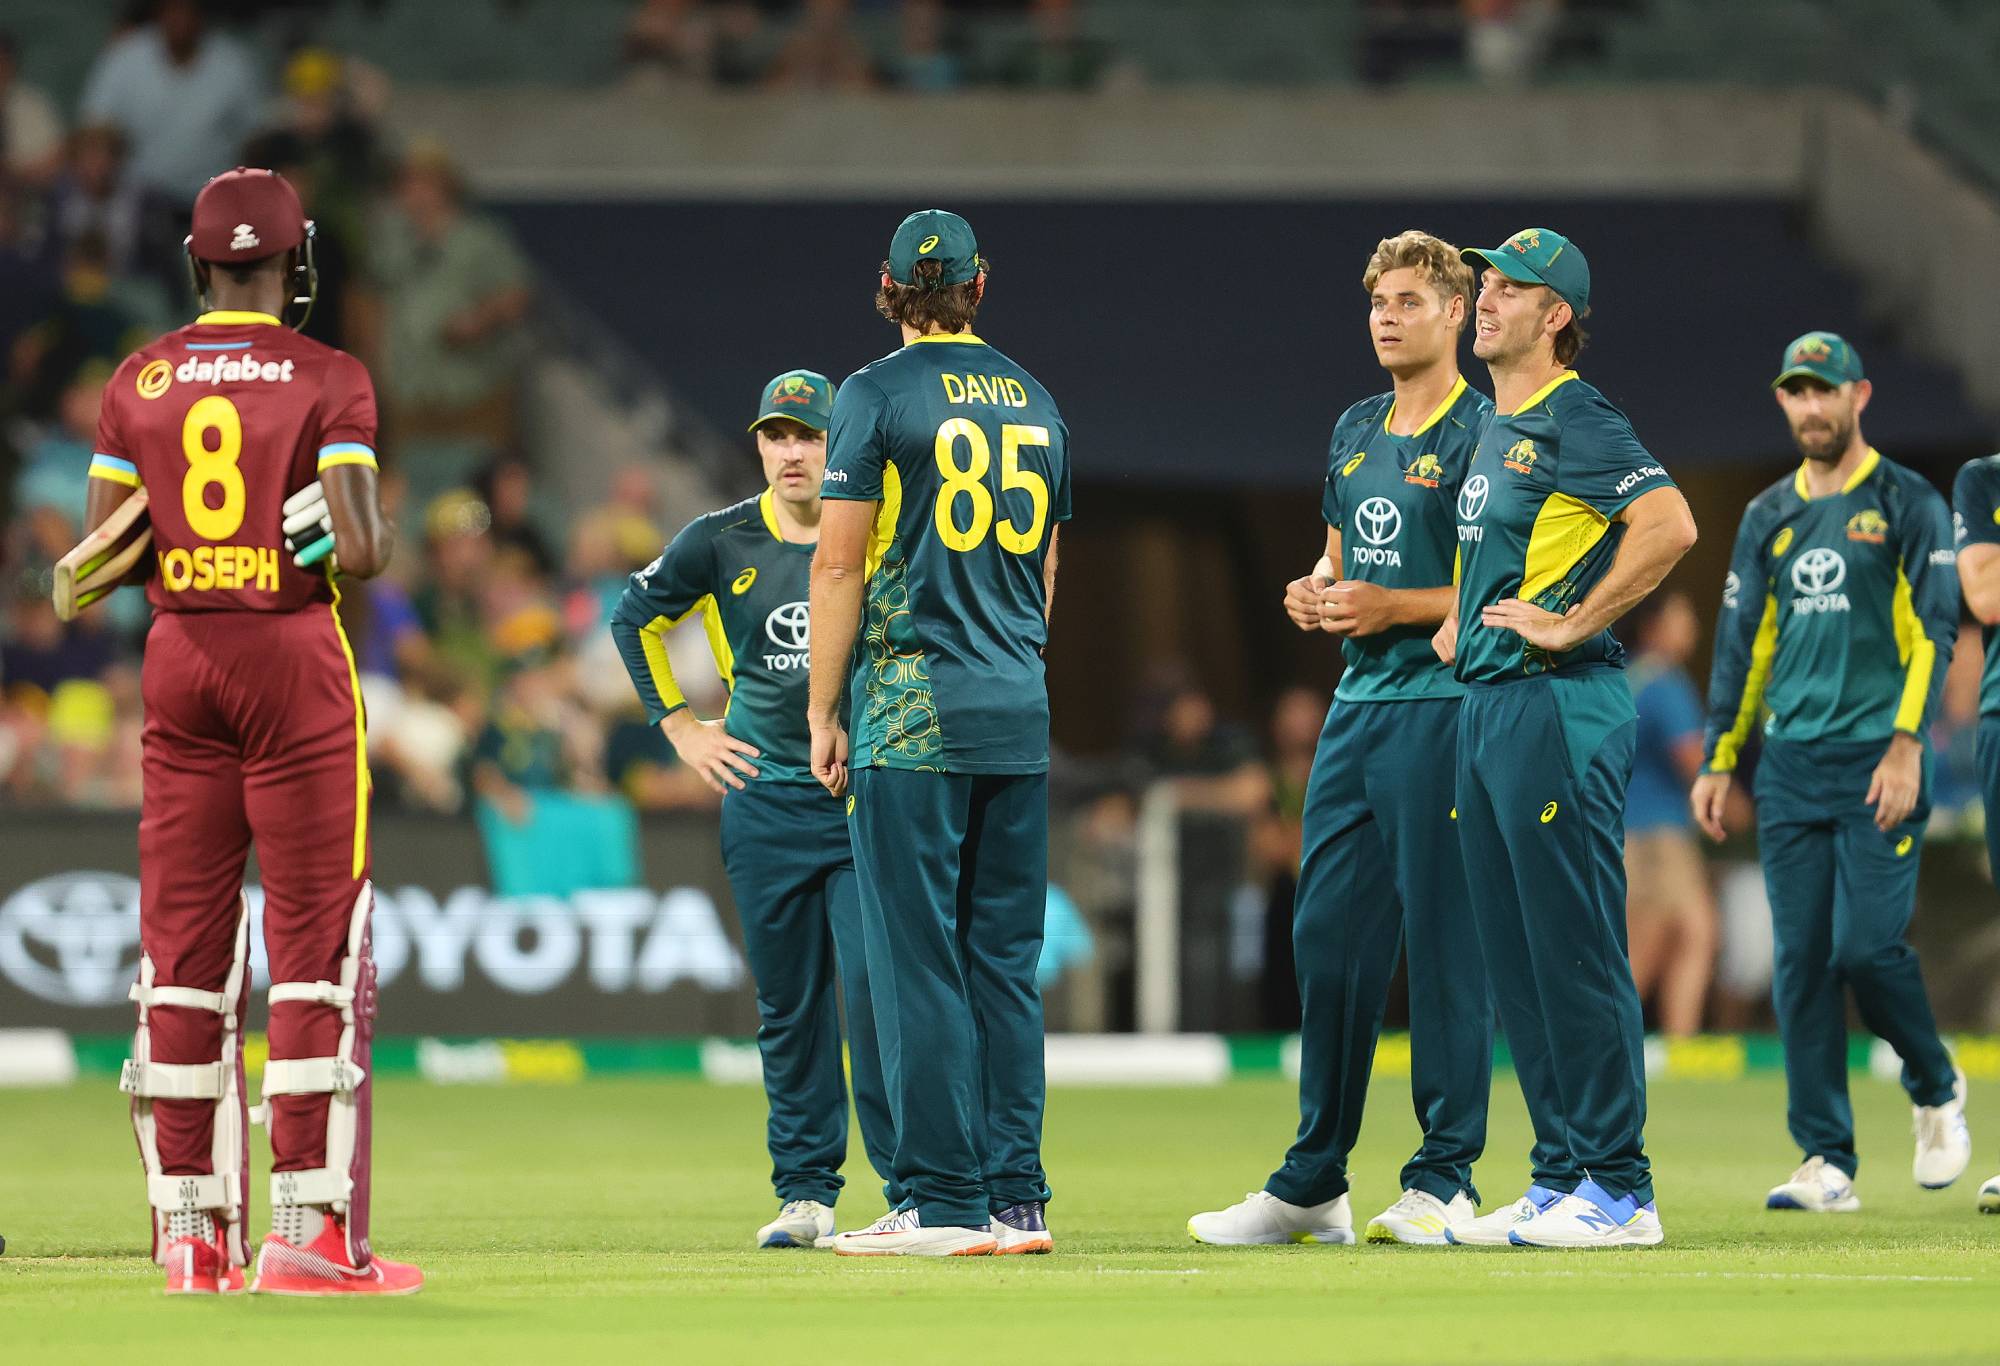 ADELAIDE, AUSTRALIA - FEBRUARY 11: Mitchell Marsh of Australia stands with his team as the umpire gets clarification on the run out of Alzarri Joseph of the West Indies by Spencer Johnson of Australia. Since no one in Australian team appealed it was ruled Not Out during game two of the mens T20 International series between Australia and West Indies at Adelaide Oval on February 11, 2024 in Adelaide, Australia. (Photo by Sarah Reed/Getty Images)